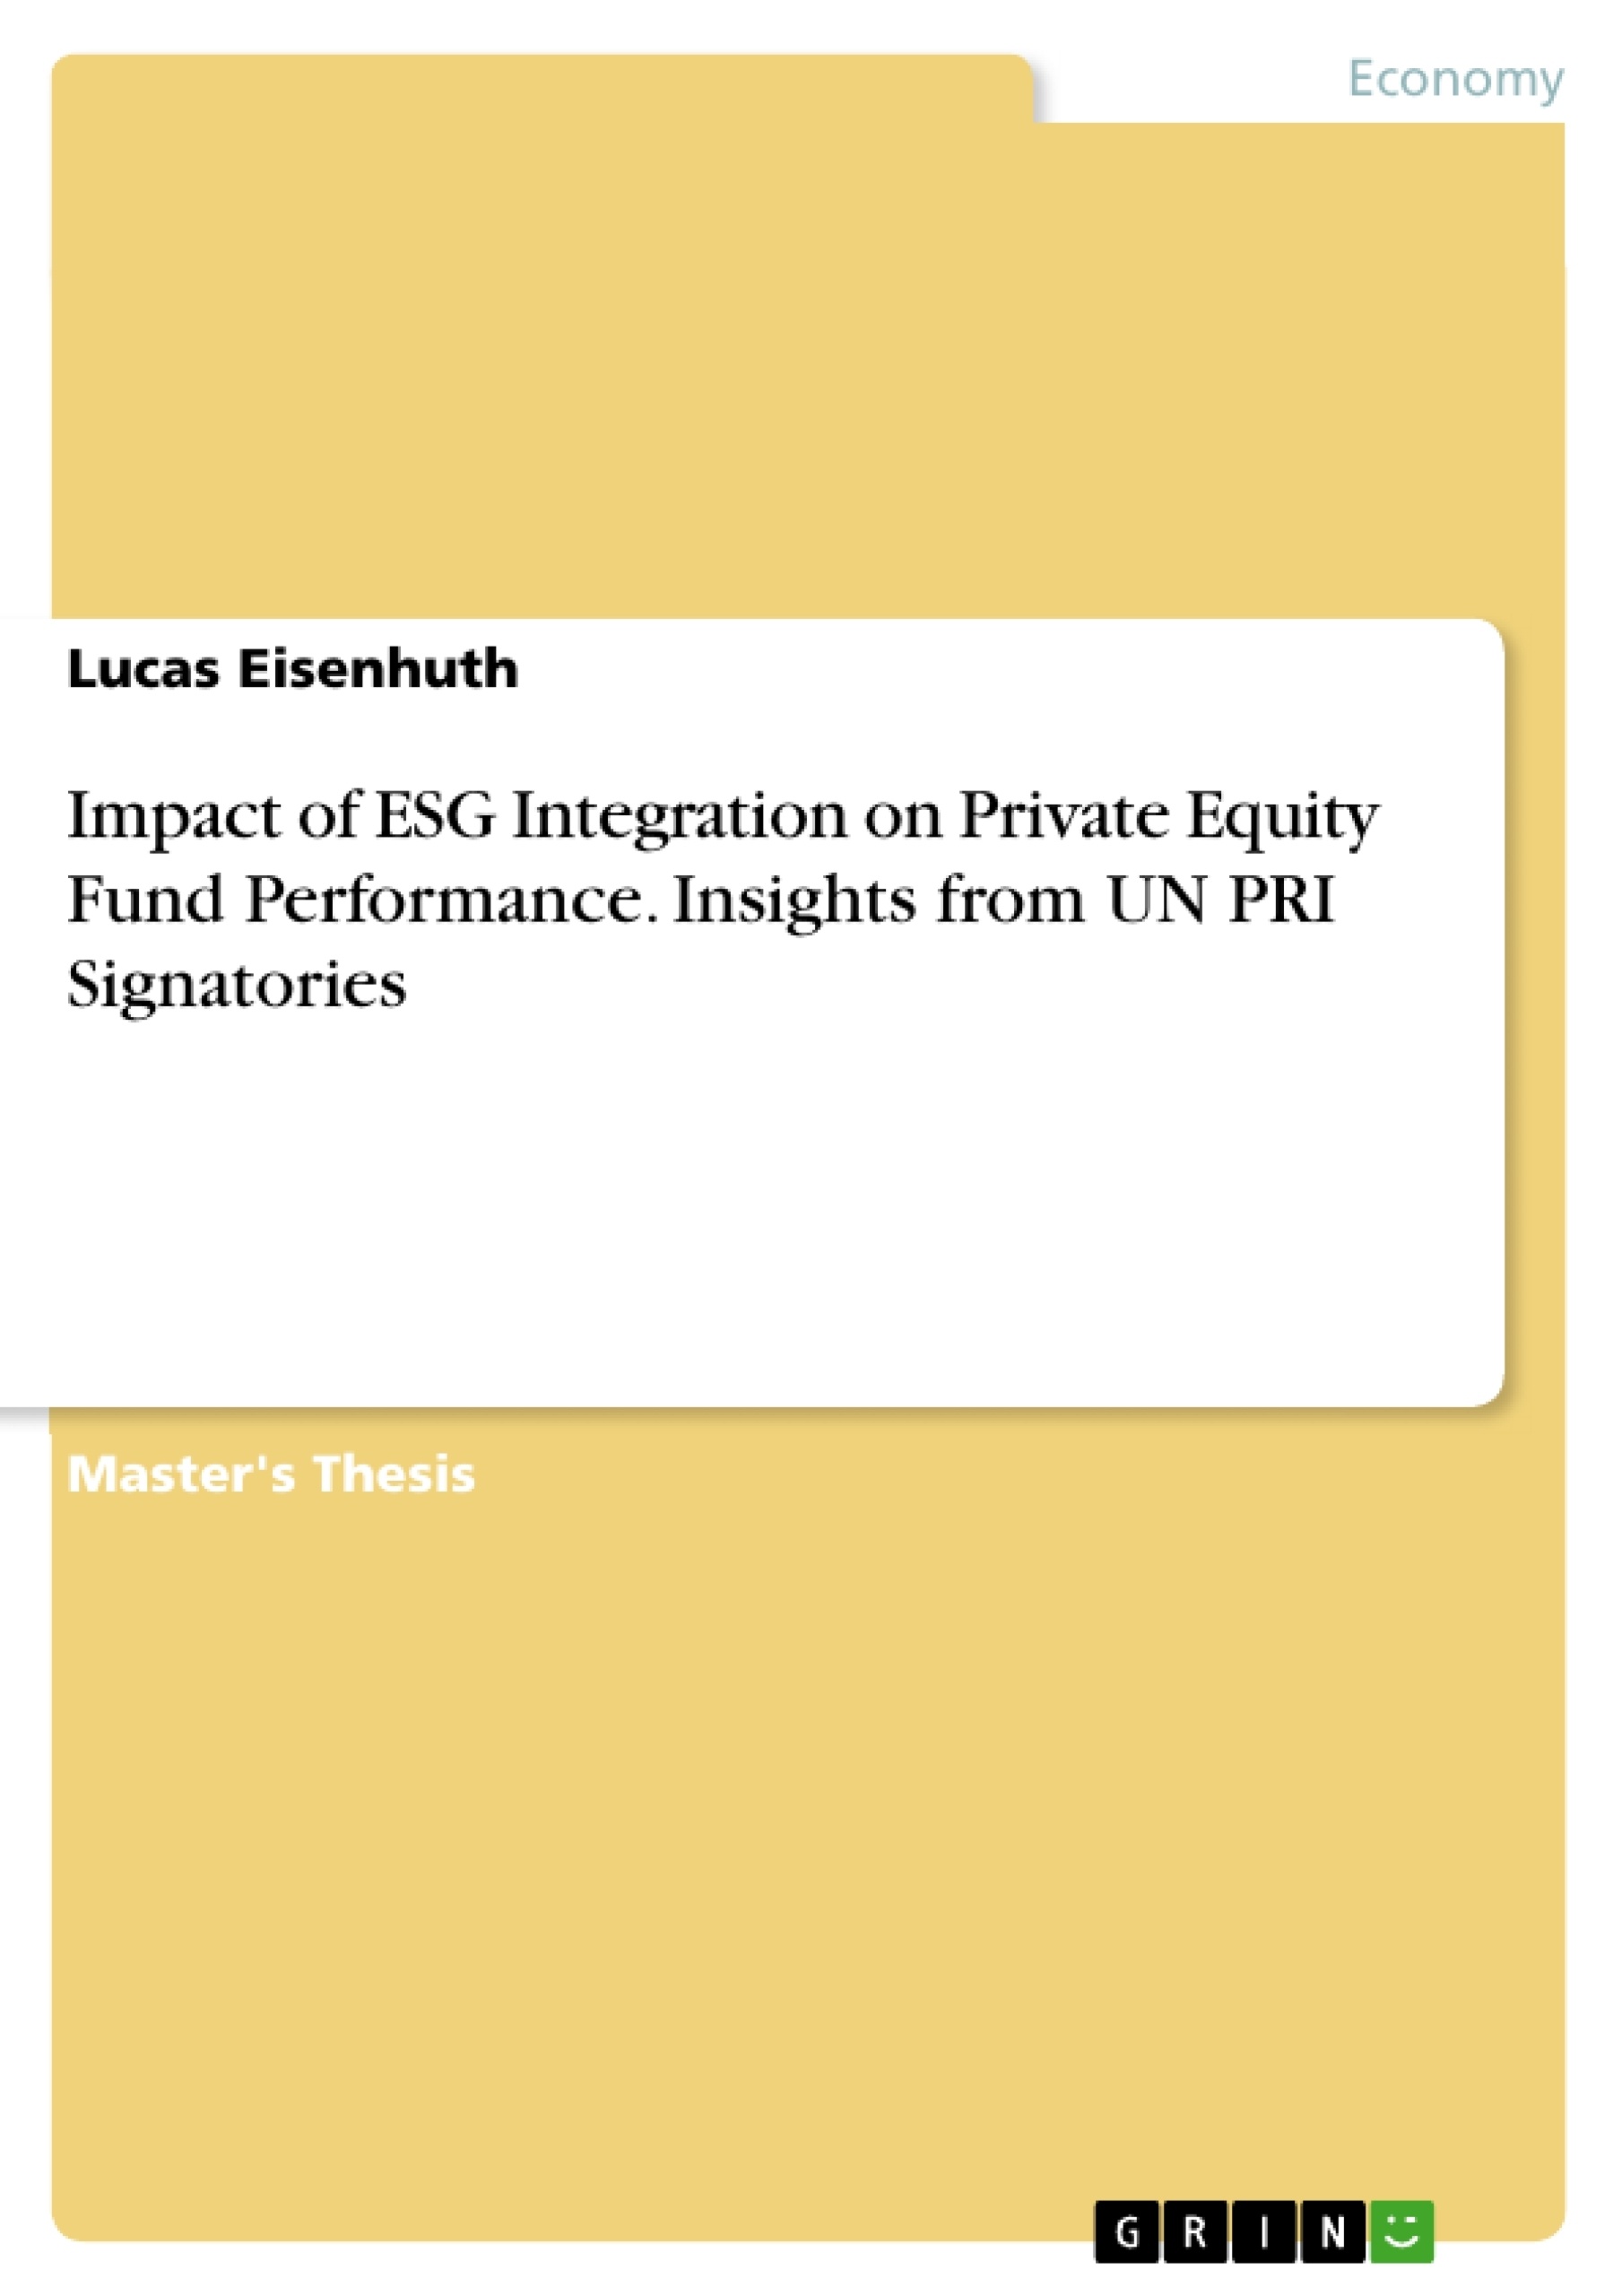 Title: Impact of ESG Integration on Private Equity Fund Performance. Insights from UN PRI Signatories